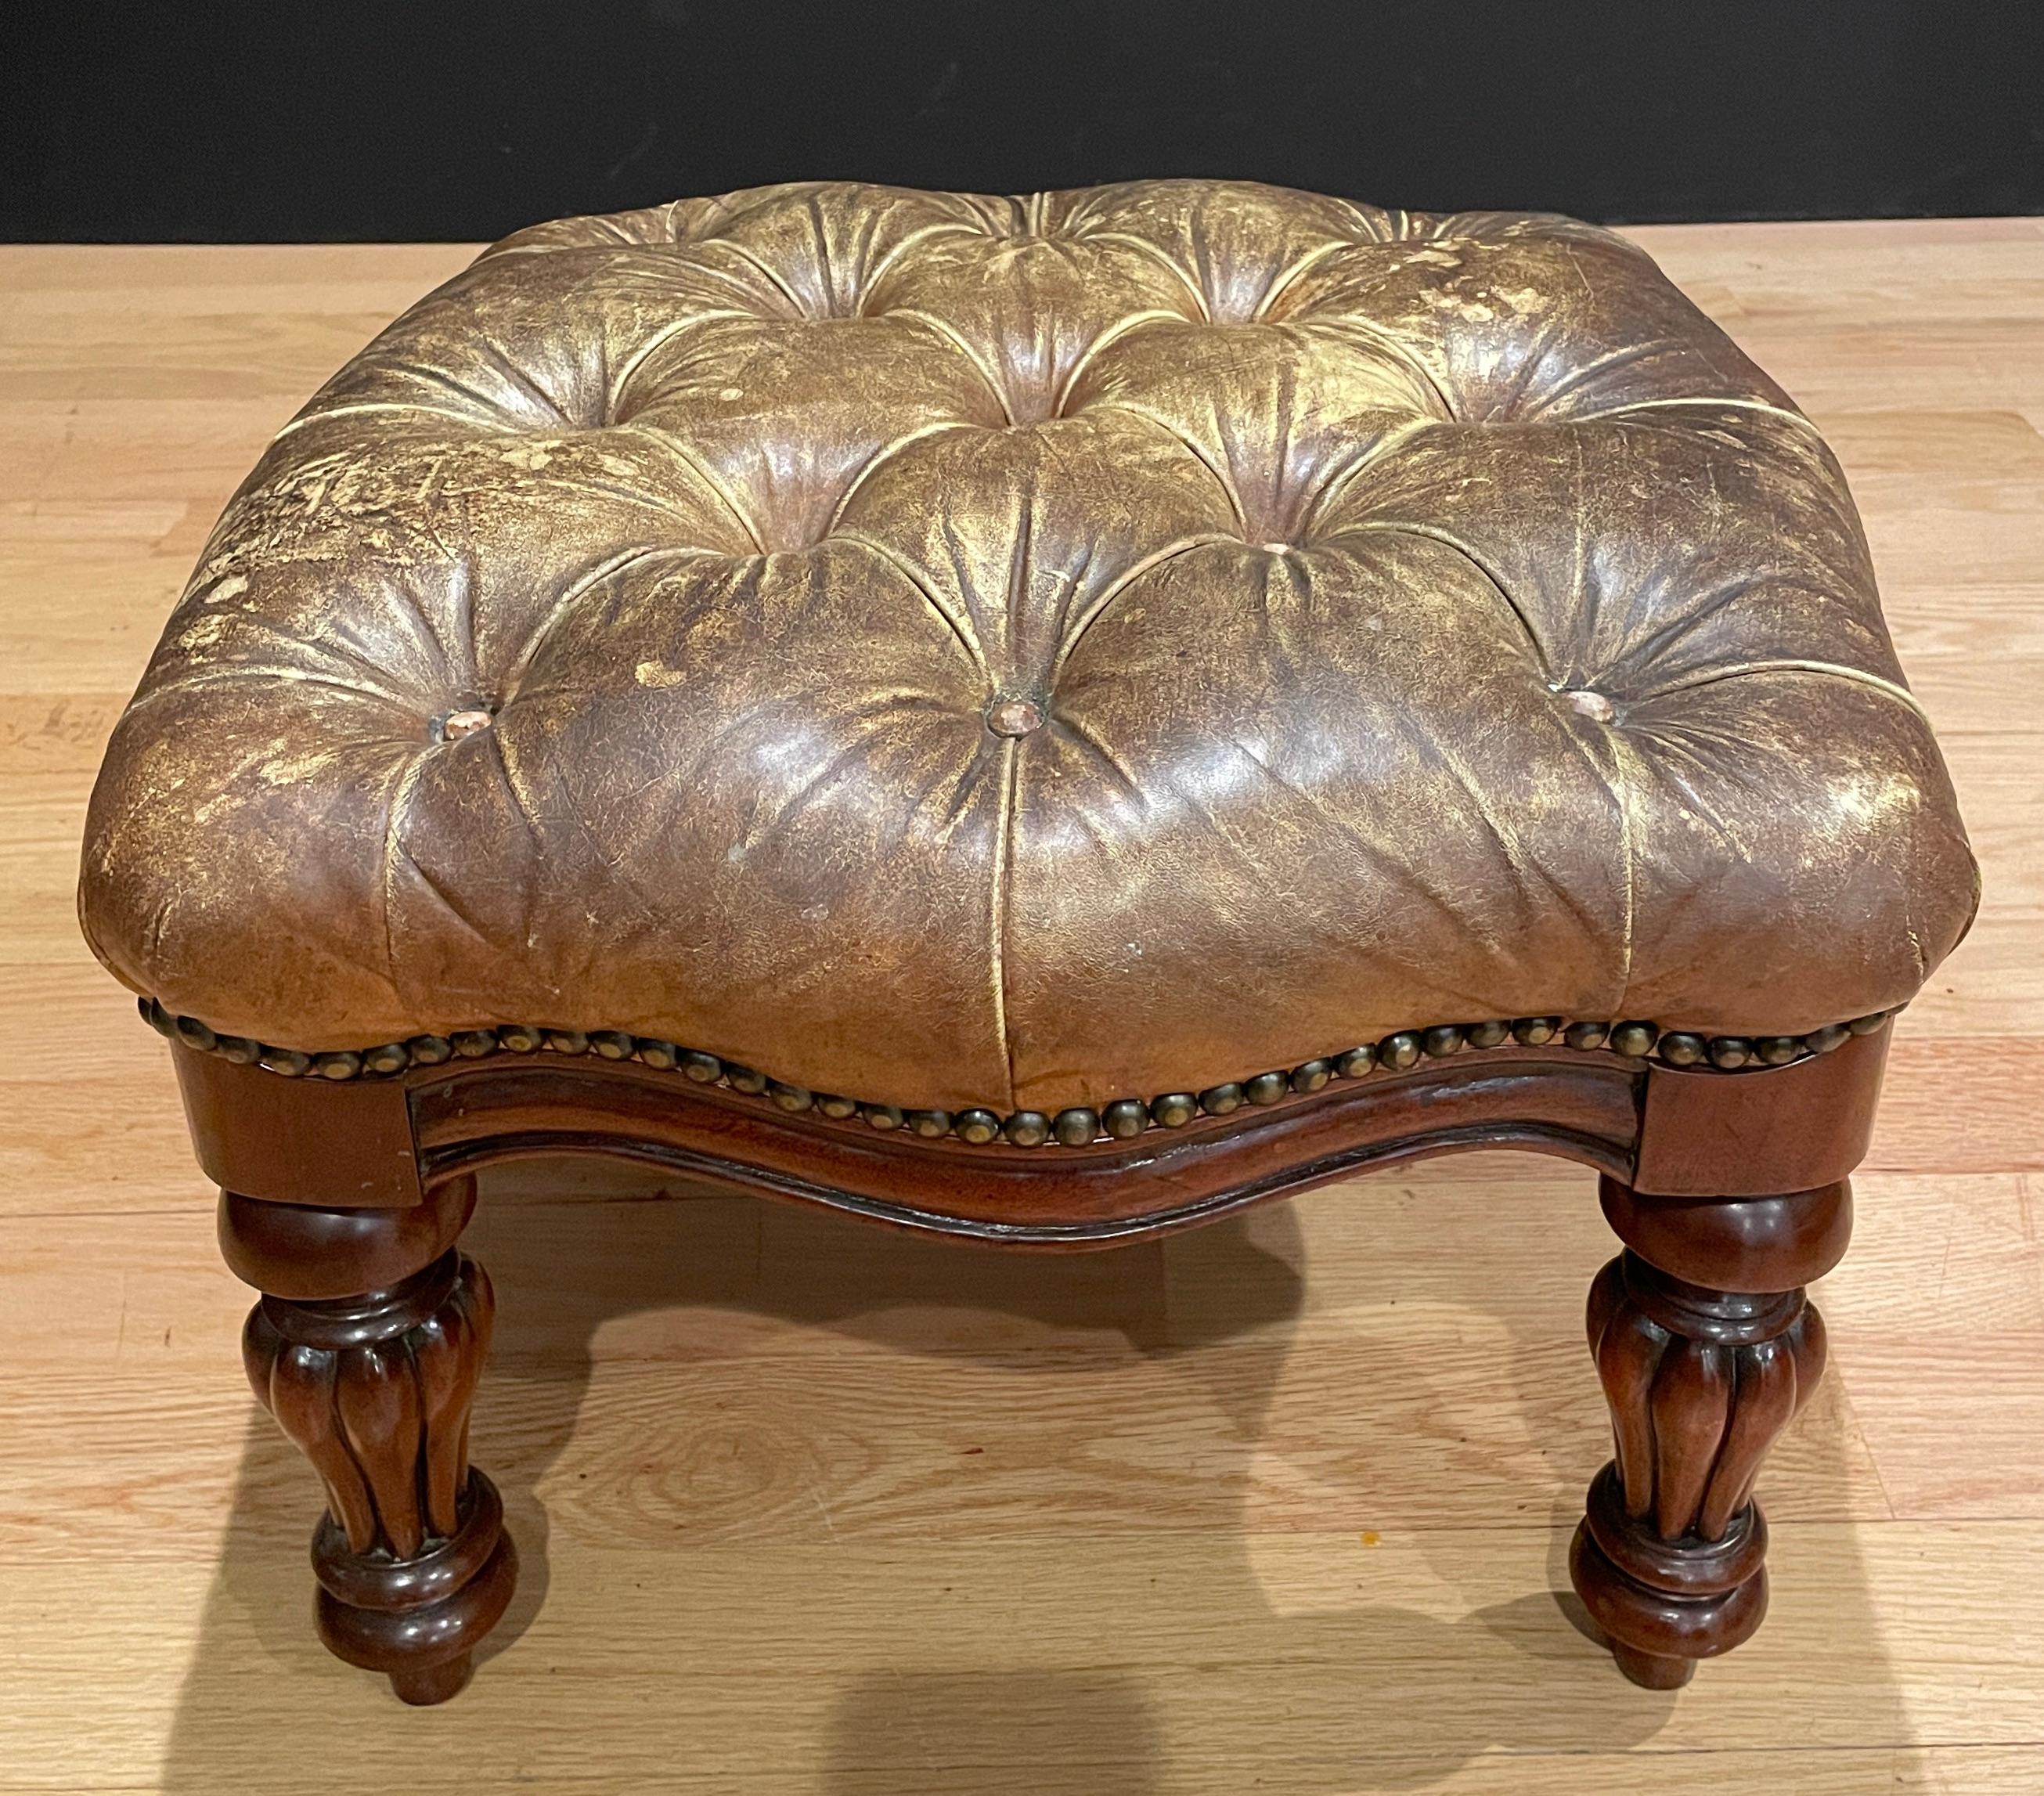 Leather tufted mahogany footstool/ottoman with turned legs olive green/beige weathered leather.